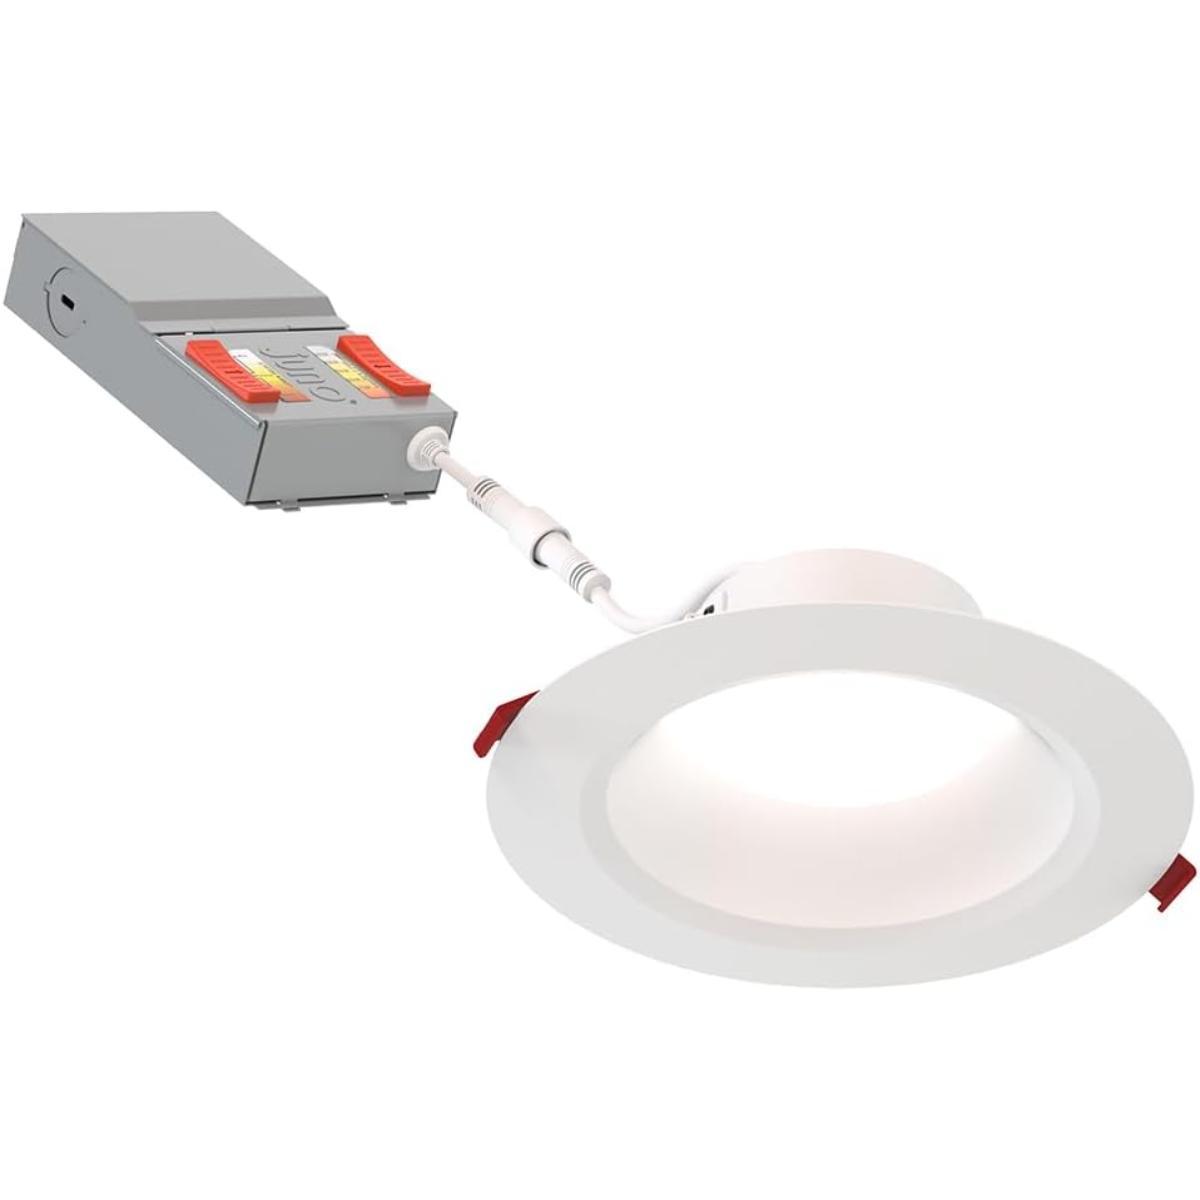 6 inch Wafer Canless LED Recessed Light, 16 Watt, 1300 Lumens, Selectable CCT, 2700K to 5000K, Smooth Trim